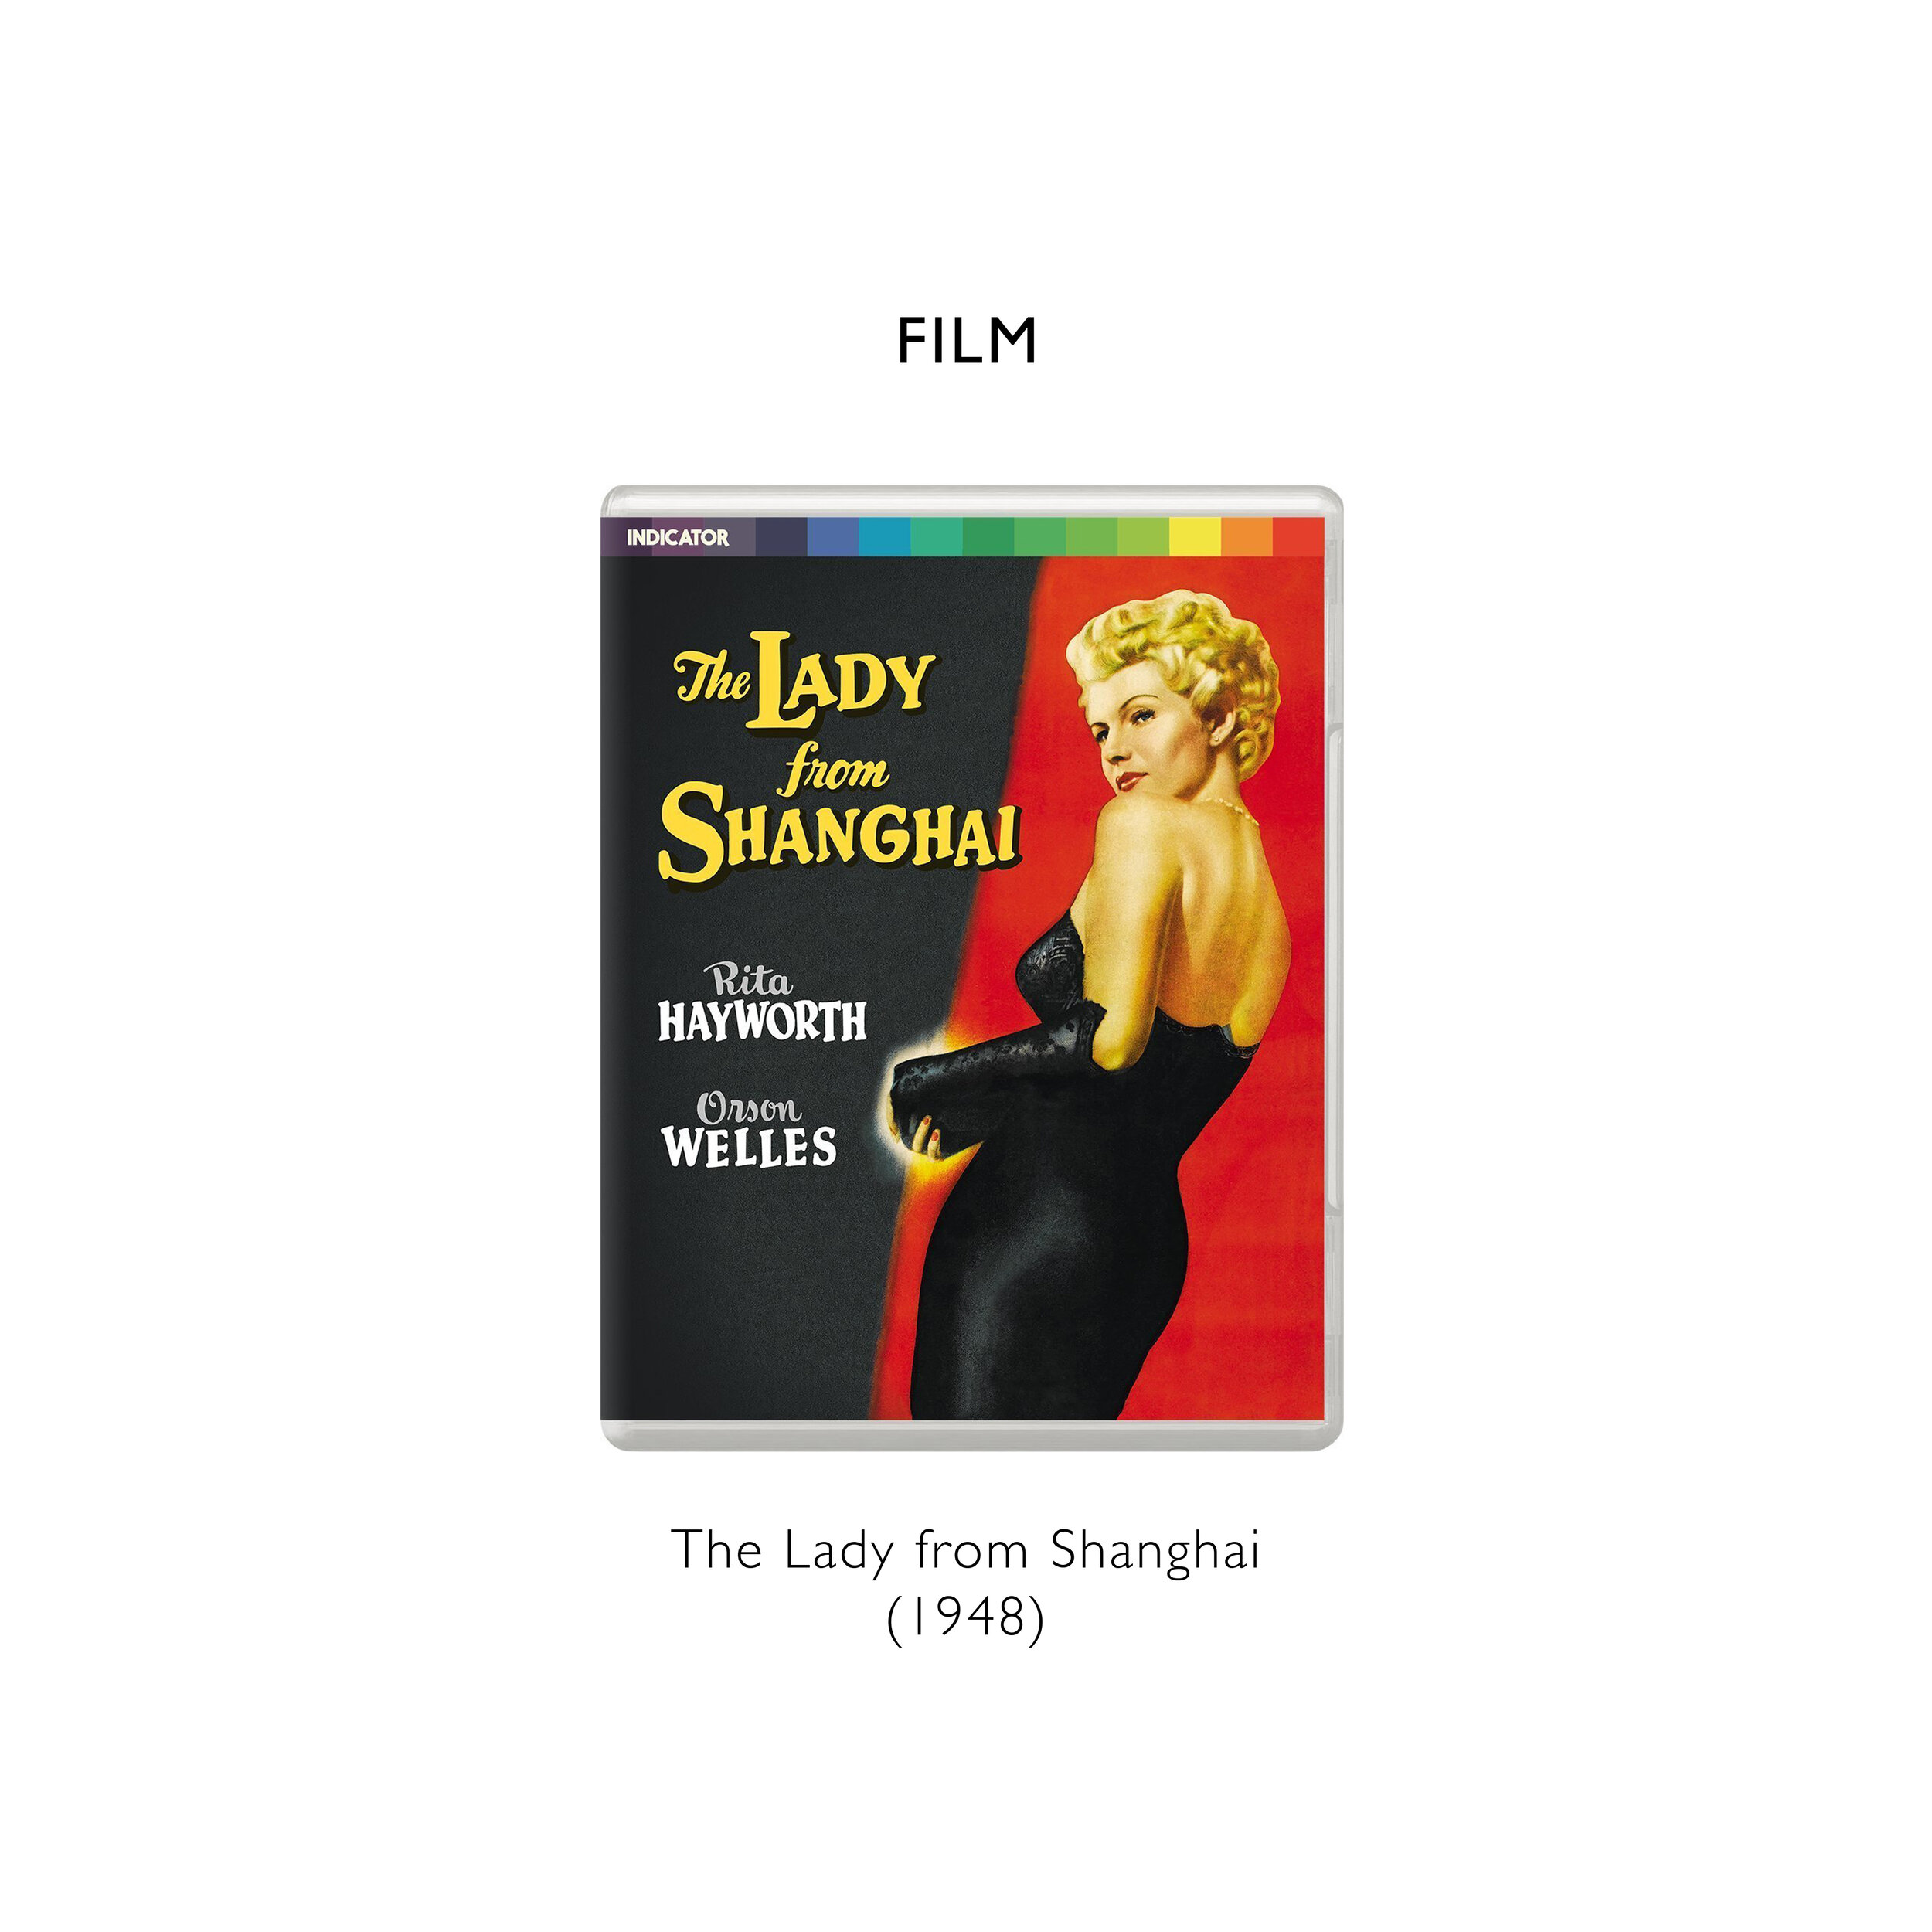 REFERENCE BLOG TEMPLATE The Lady from Shanghai (1948) copy.jpg